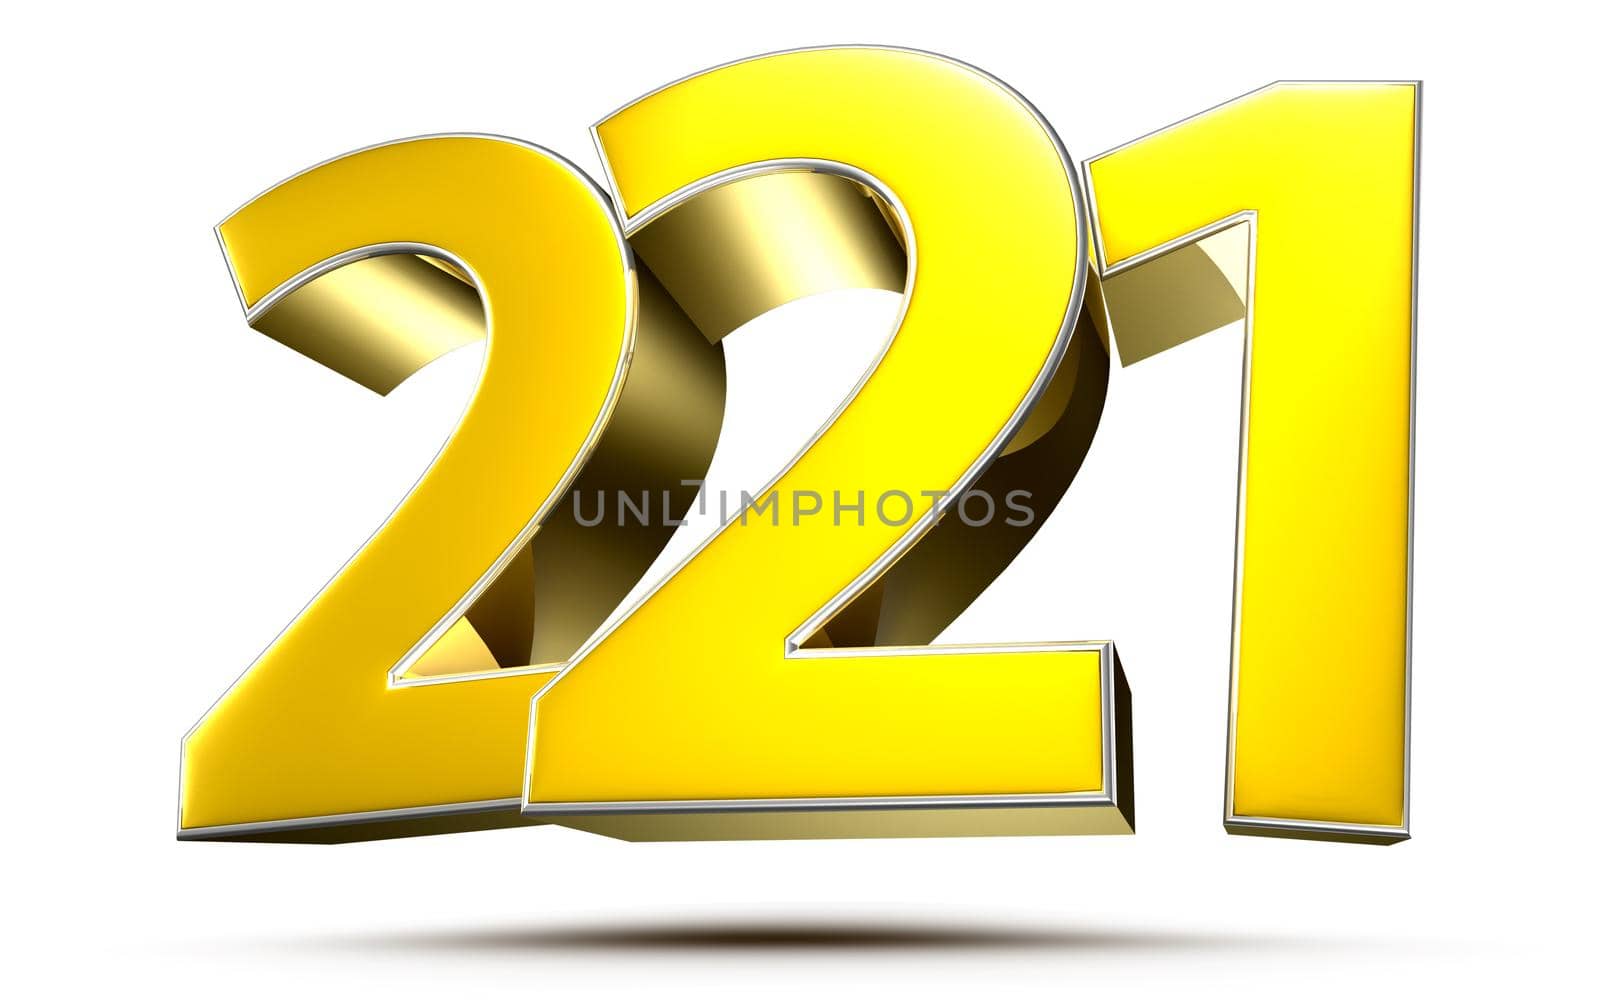 221 gold 3D illustration on white background with clipping path.